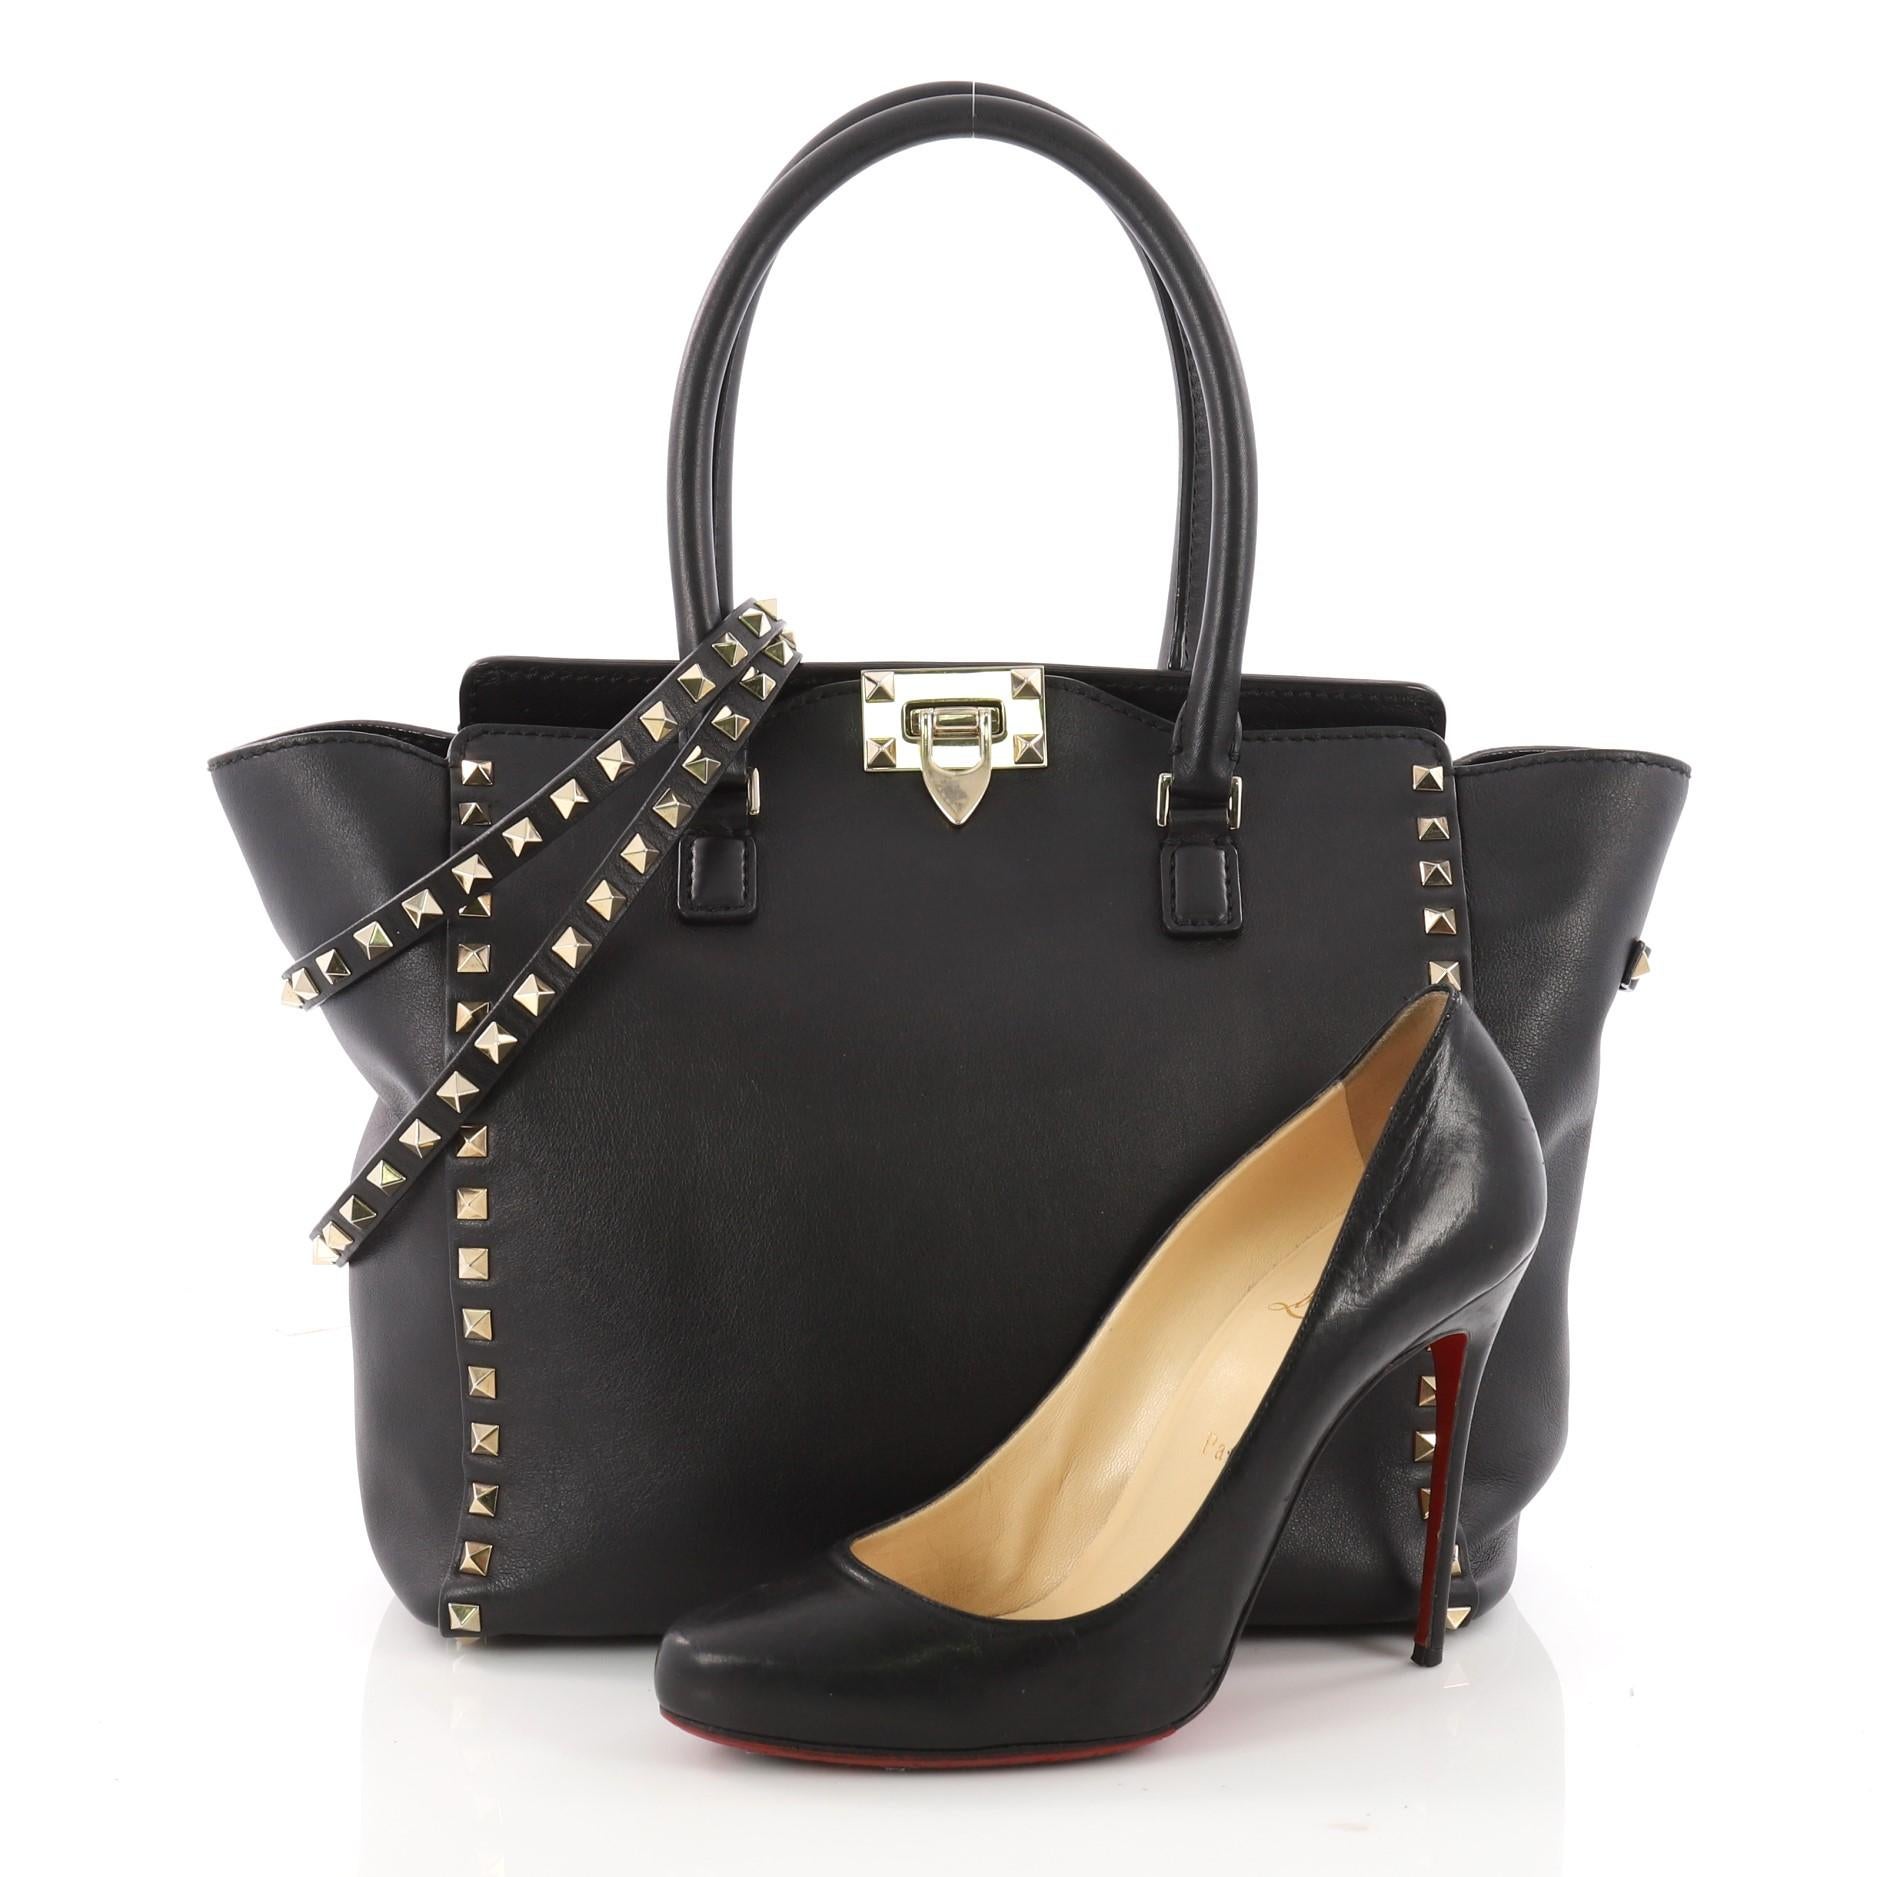 This authentic Valentino Rockstud Tote Rigid Leather Medium is a stylish and iconic bag that is one of today's most sought-after styles. Crafted from beautiful black rigid leather, this chic tote features signature gold pyramid stud borders,